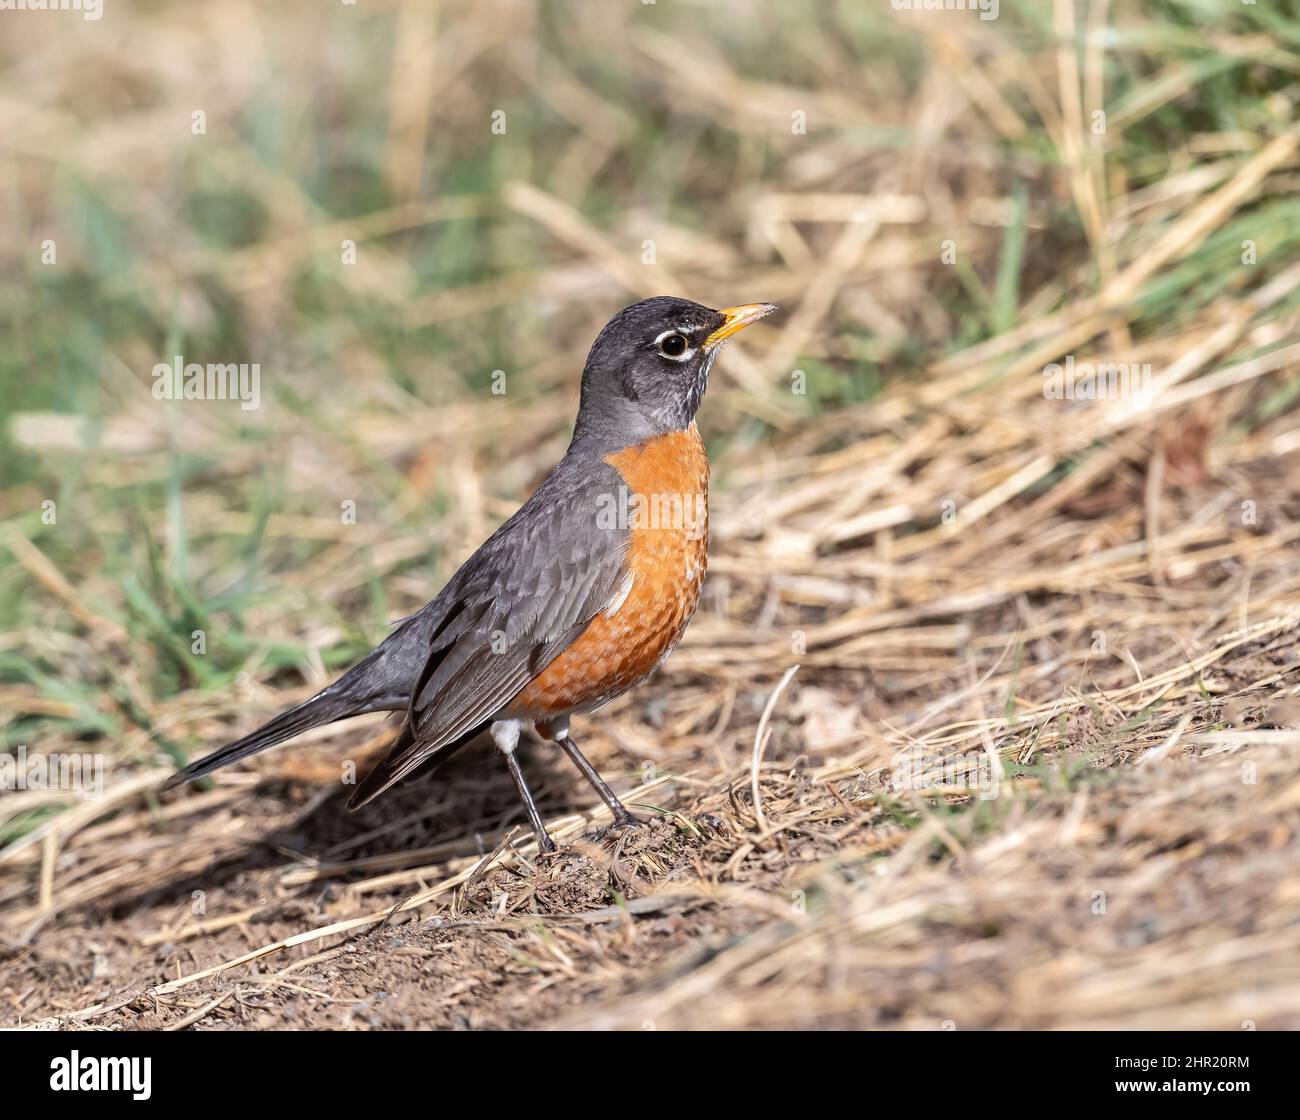 Closeup of an American Robin on a wild, hillside area in early Spring. Stock Photo